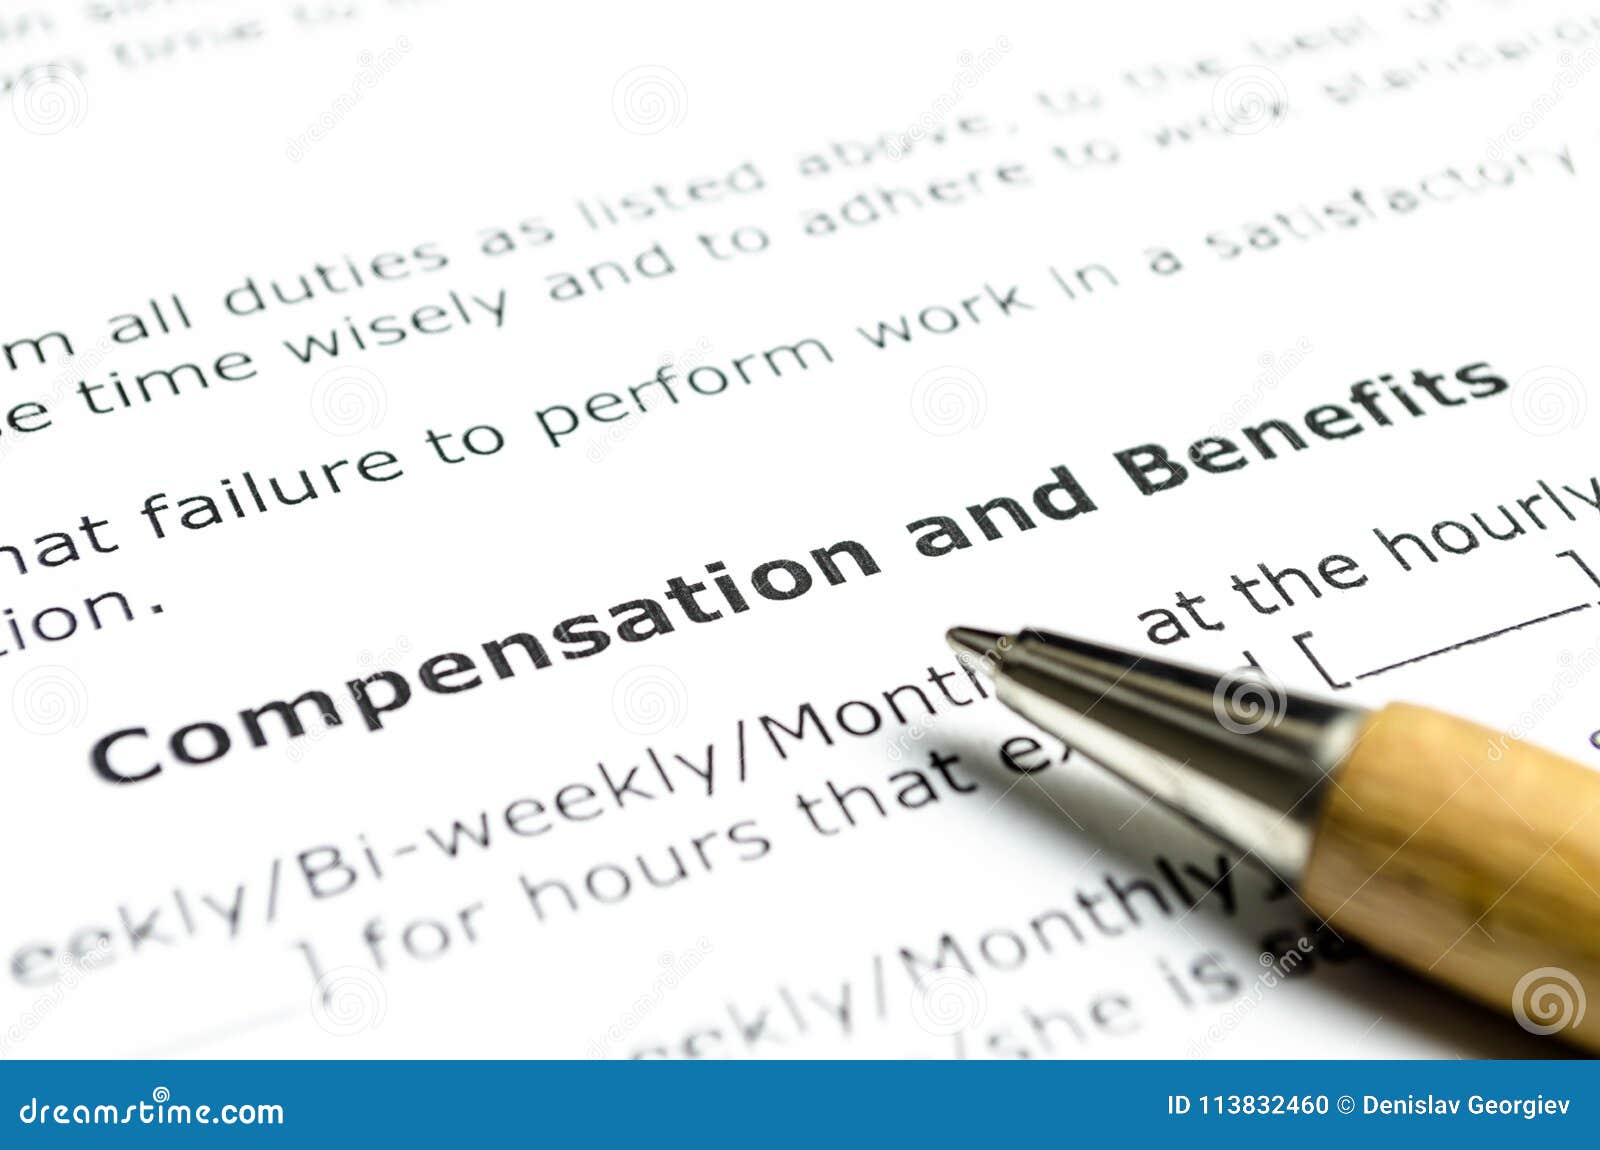 compensation and benefits with wooden pen